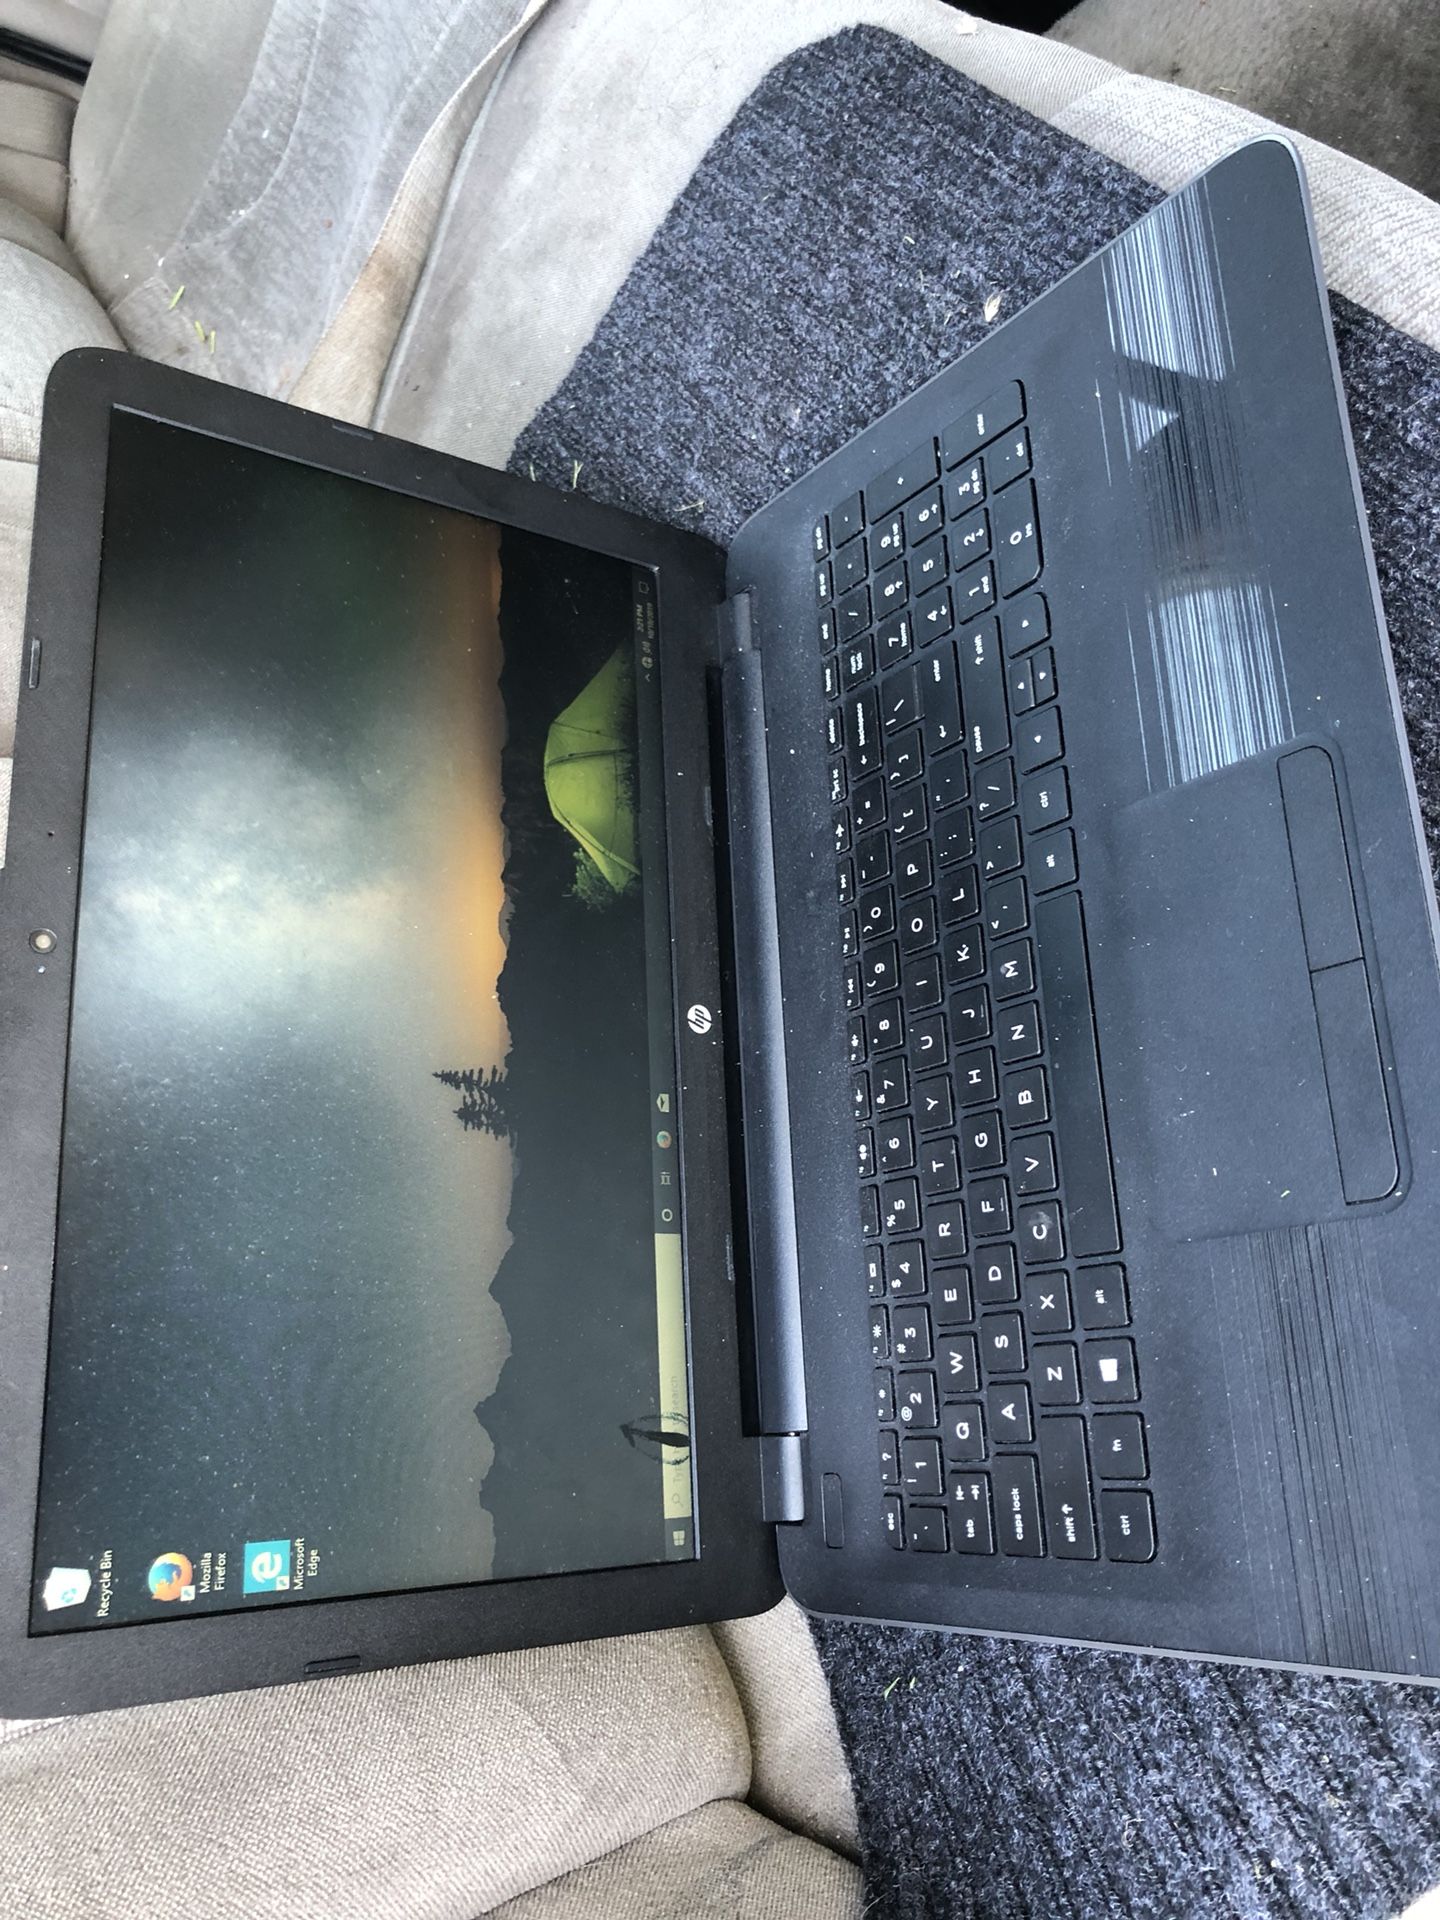 Hp laptop with mouse and charger